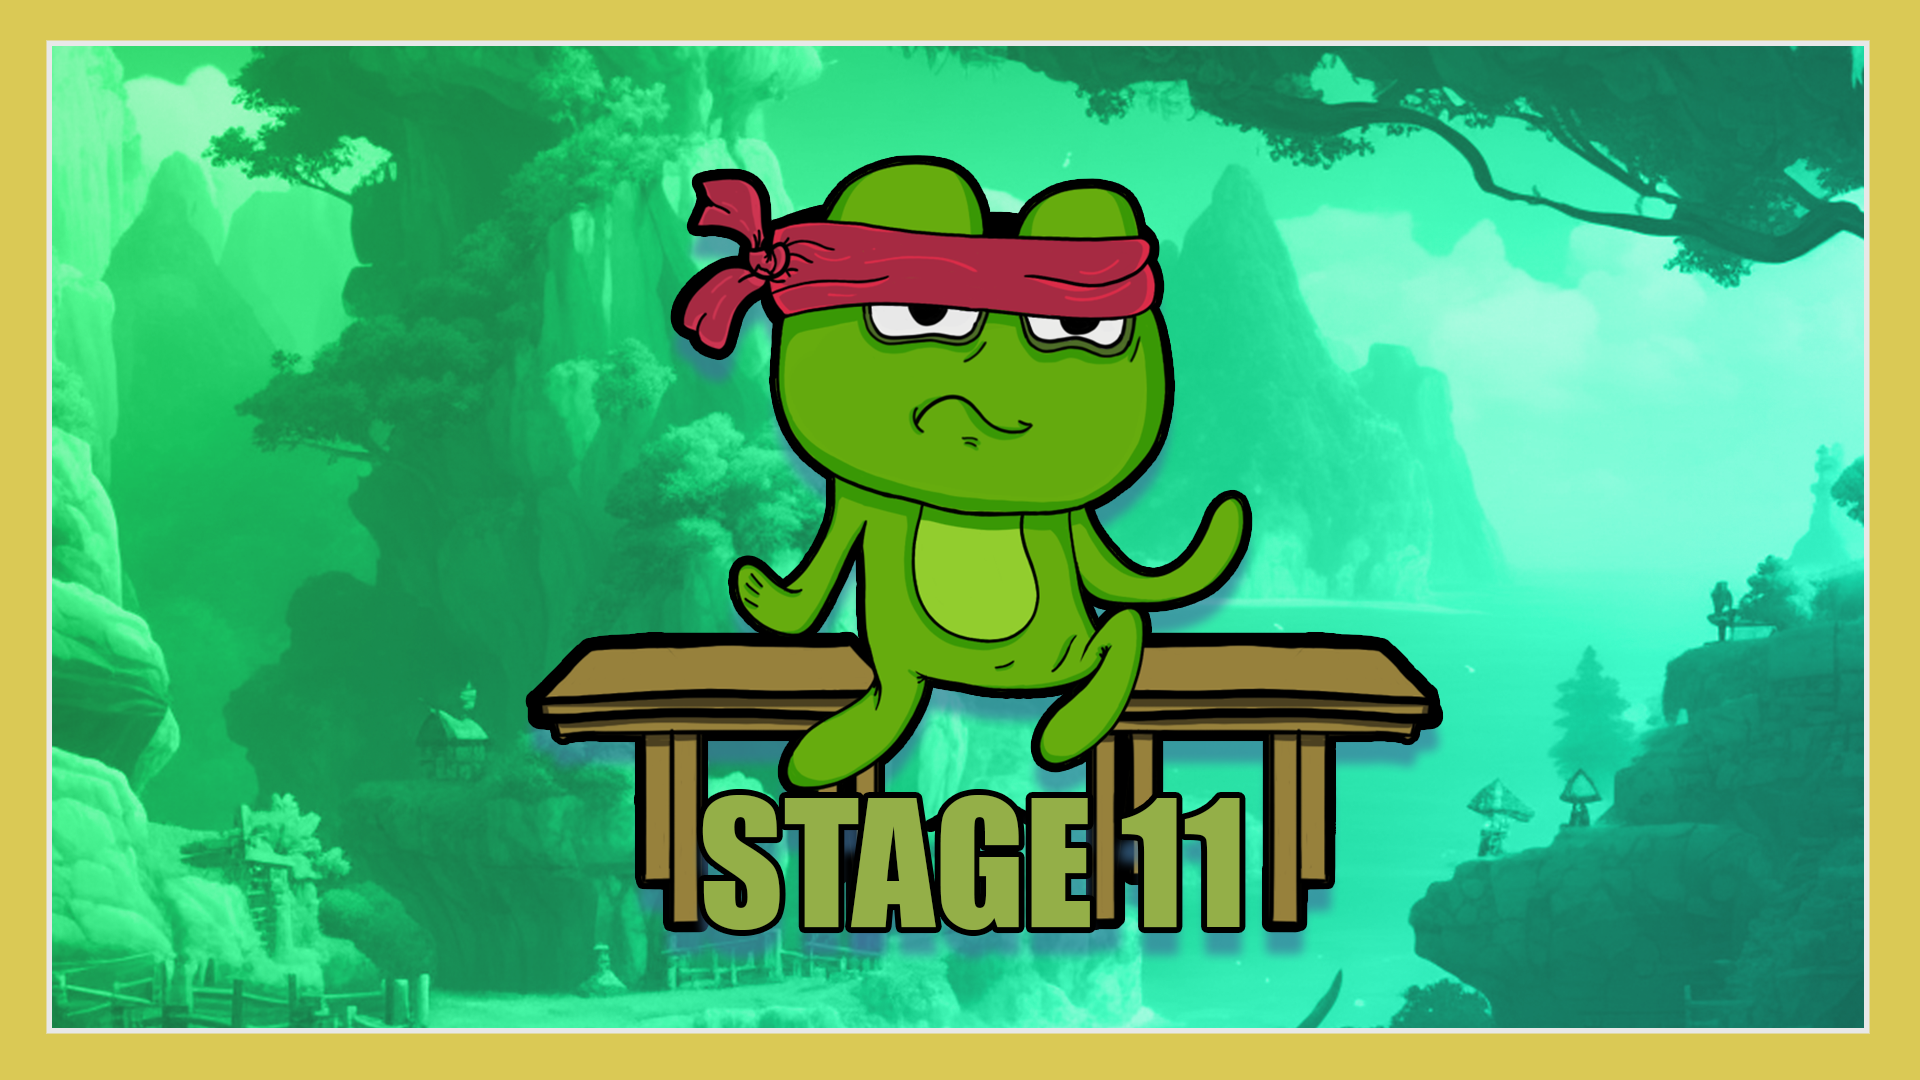 STAGE 11